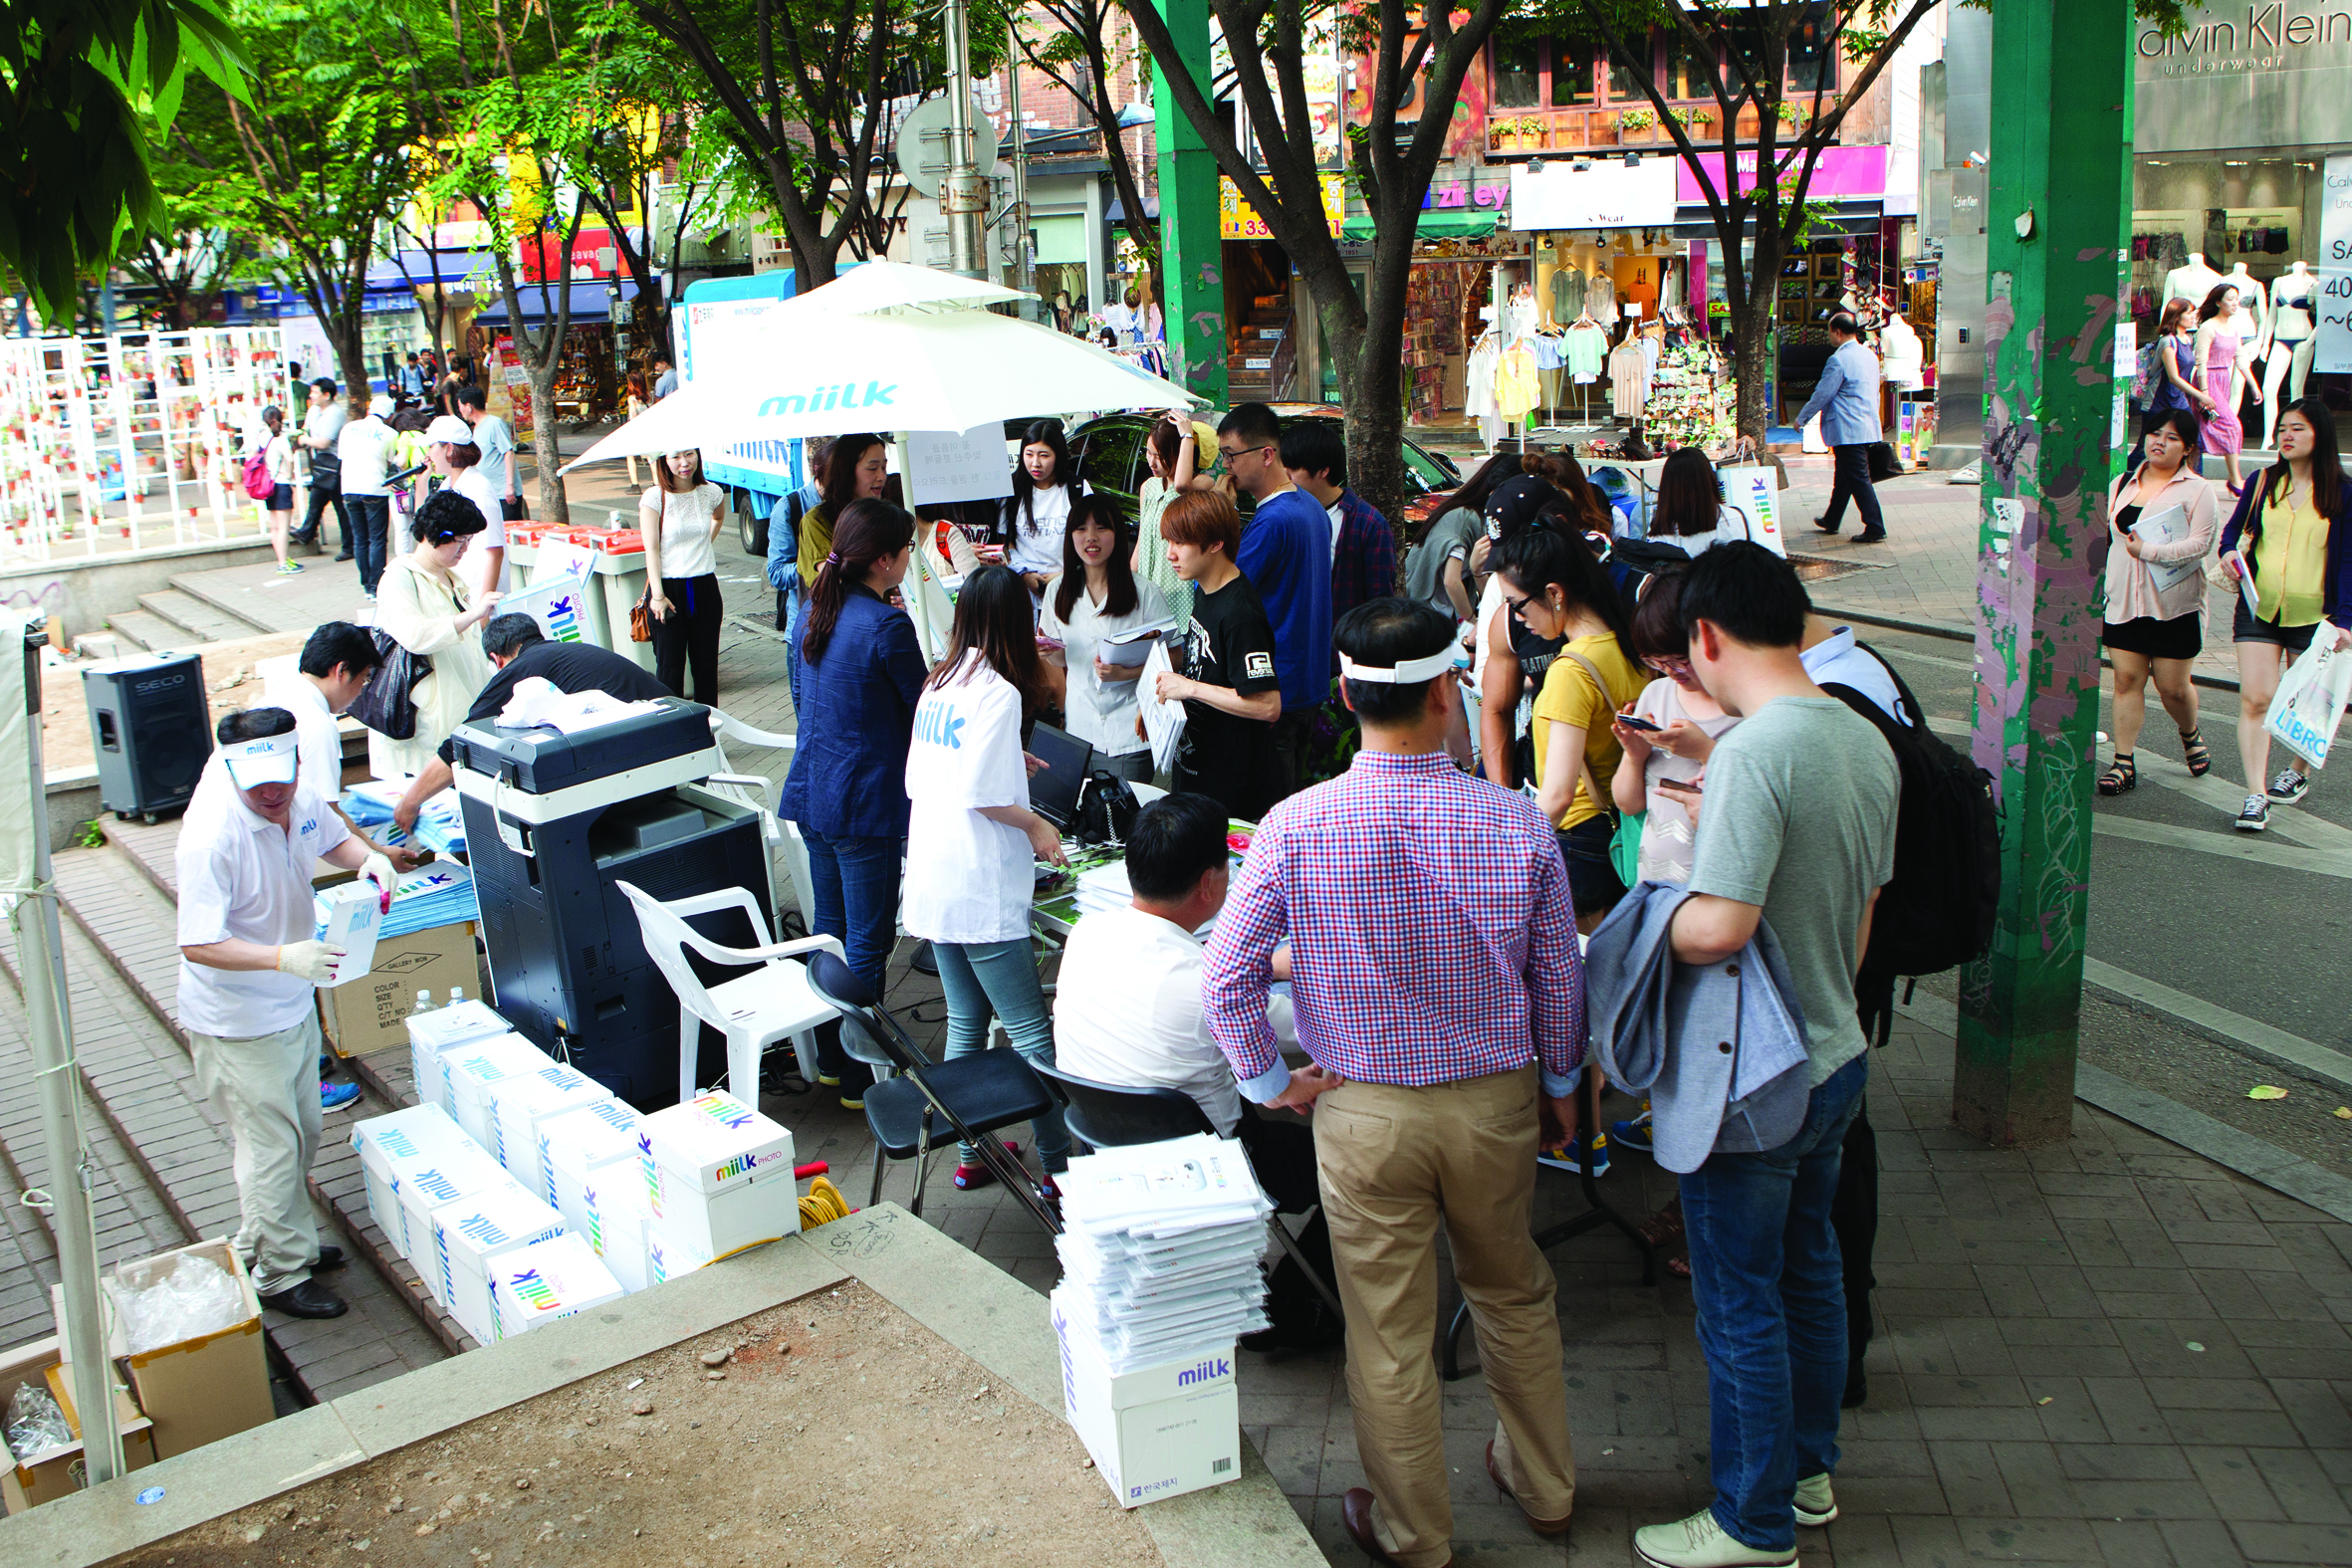 [Roadshow] the successfully conducted miilk roadshow in the summer streets. 